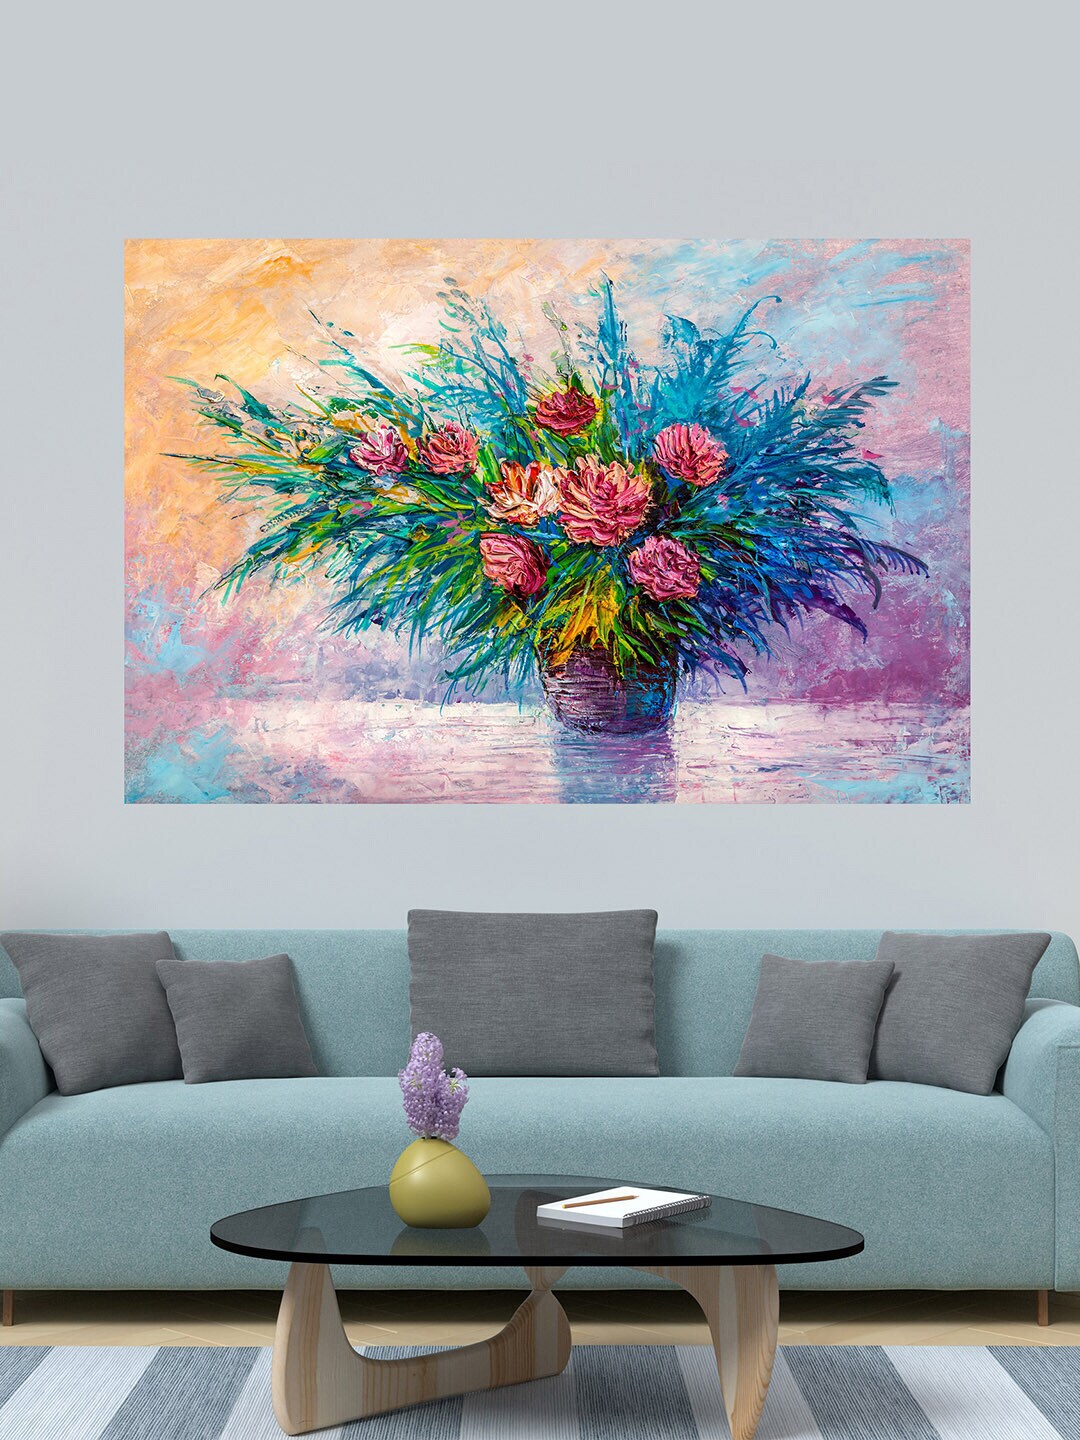 WENS Blue & Pink Colorful Floral Art Printed Vinyl Wall Sticker Price in India